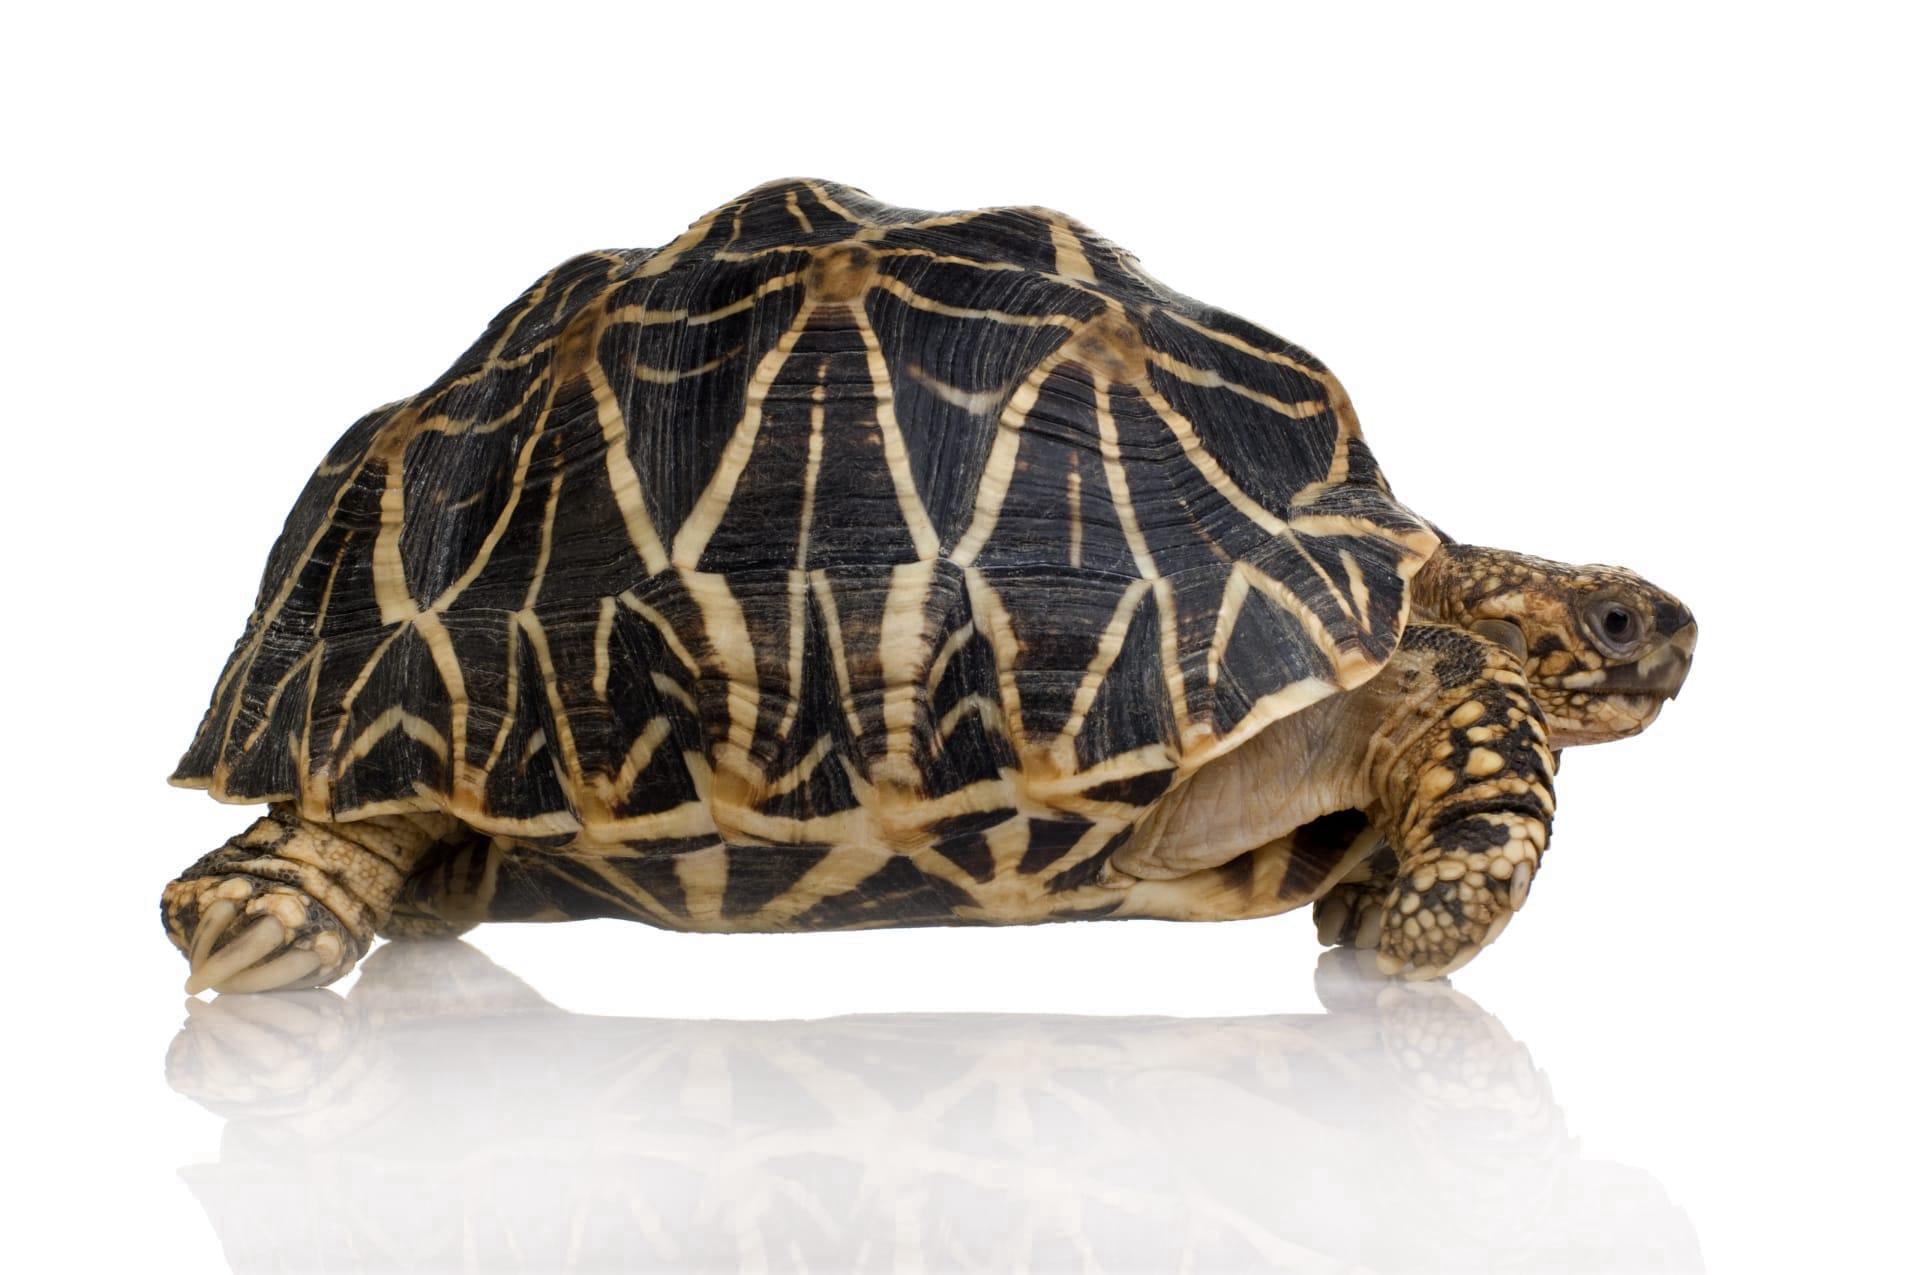 Indian star tortoise pictures